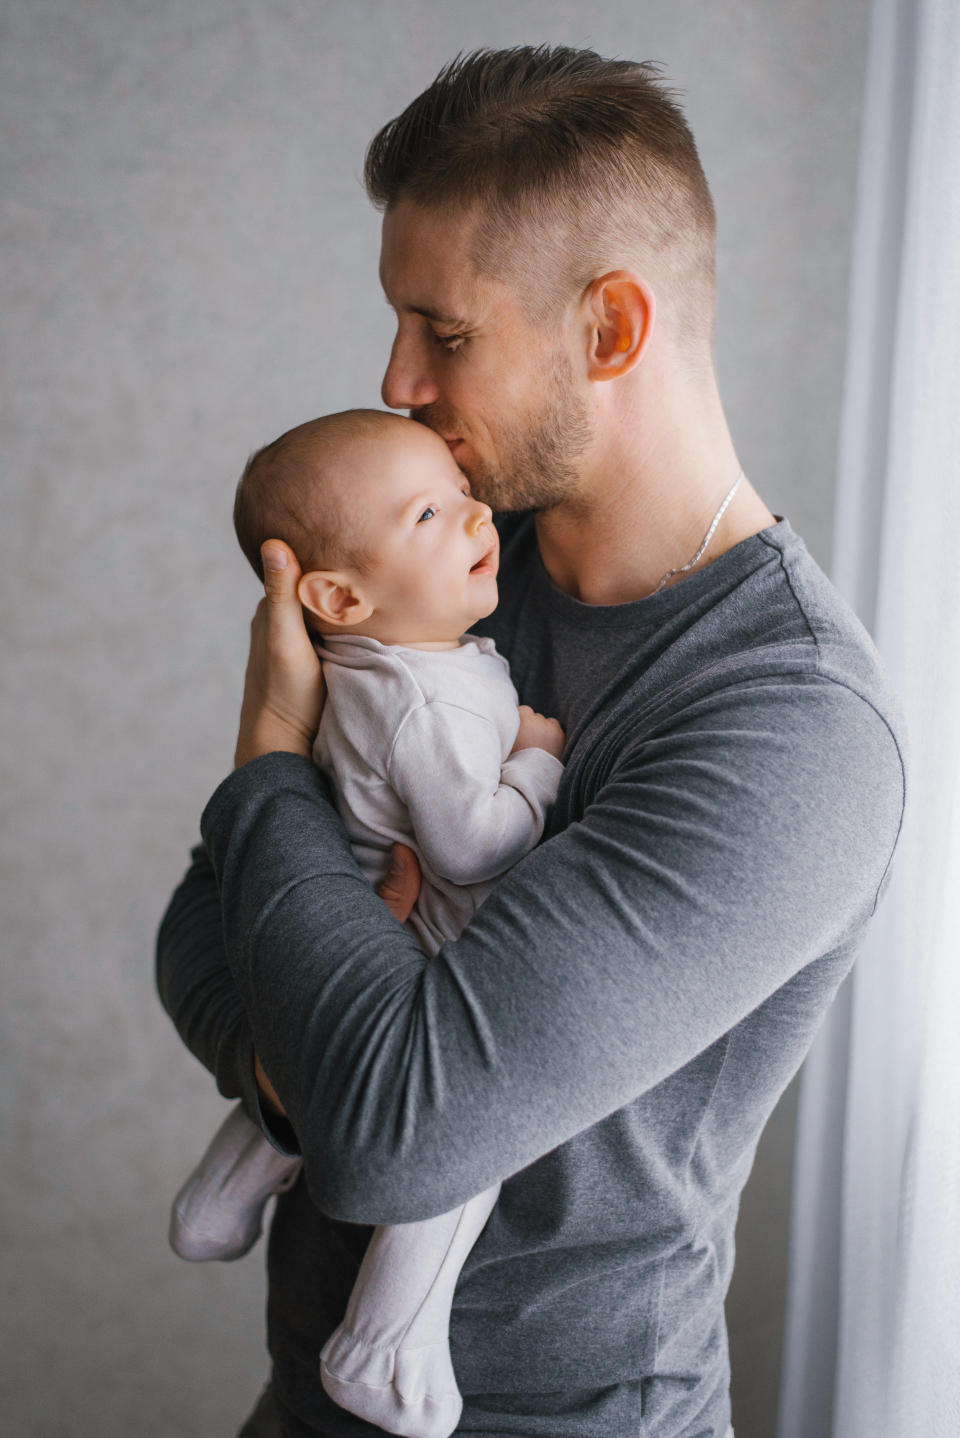 Man embraces and kisses a baby on the forehead. Both are in casual clothing. Names unknown